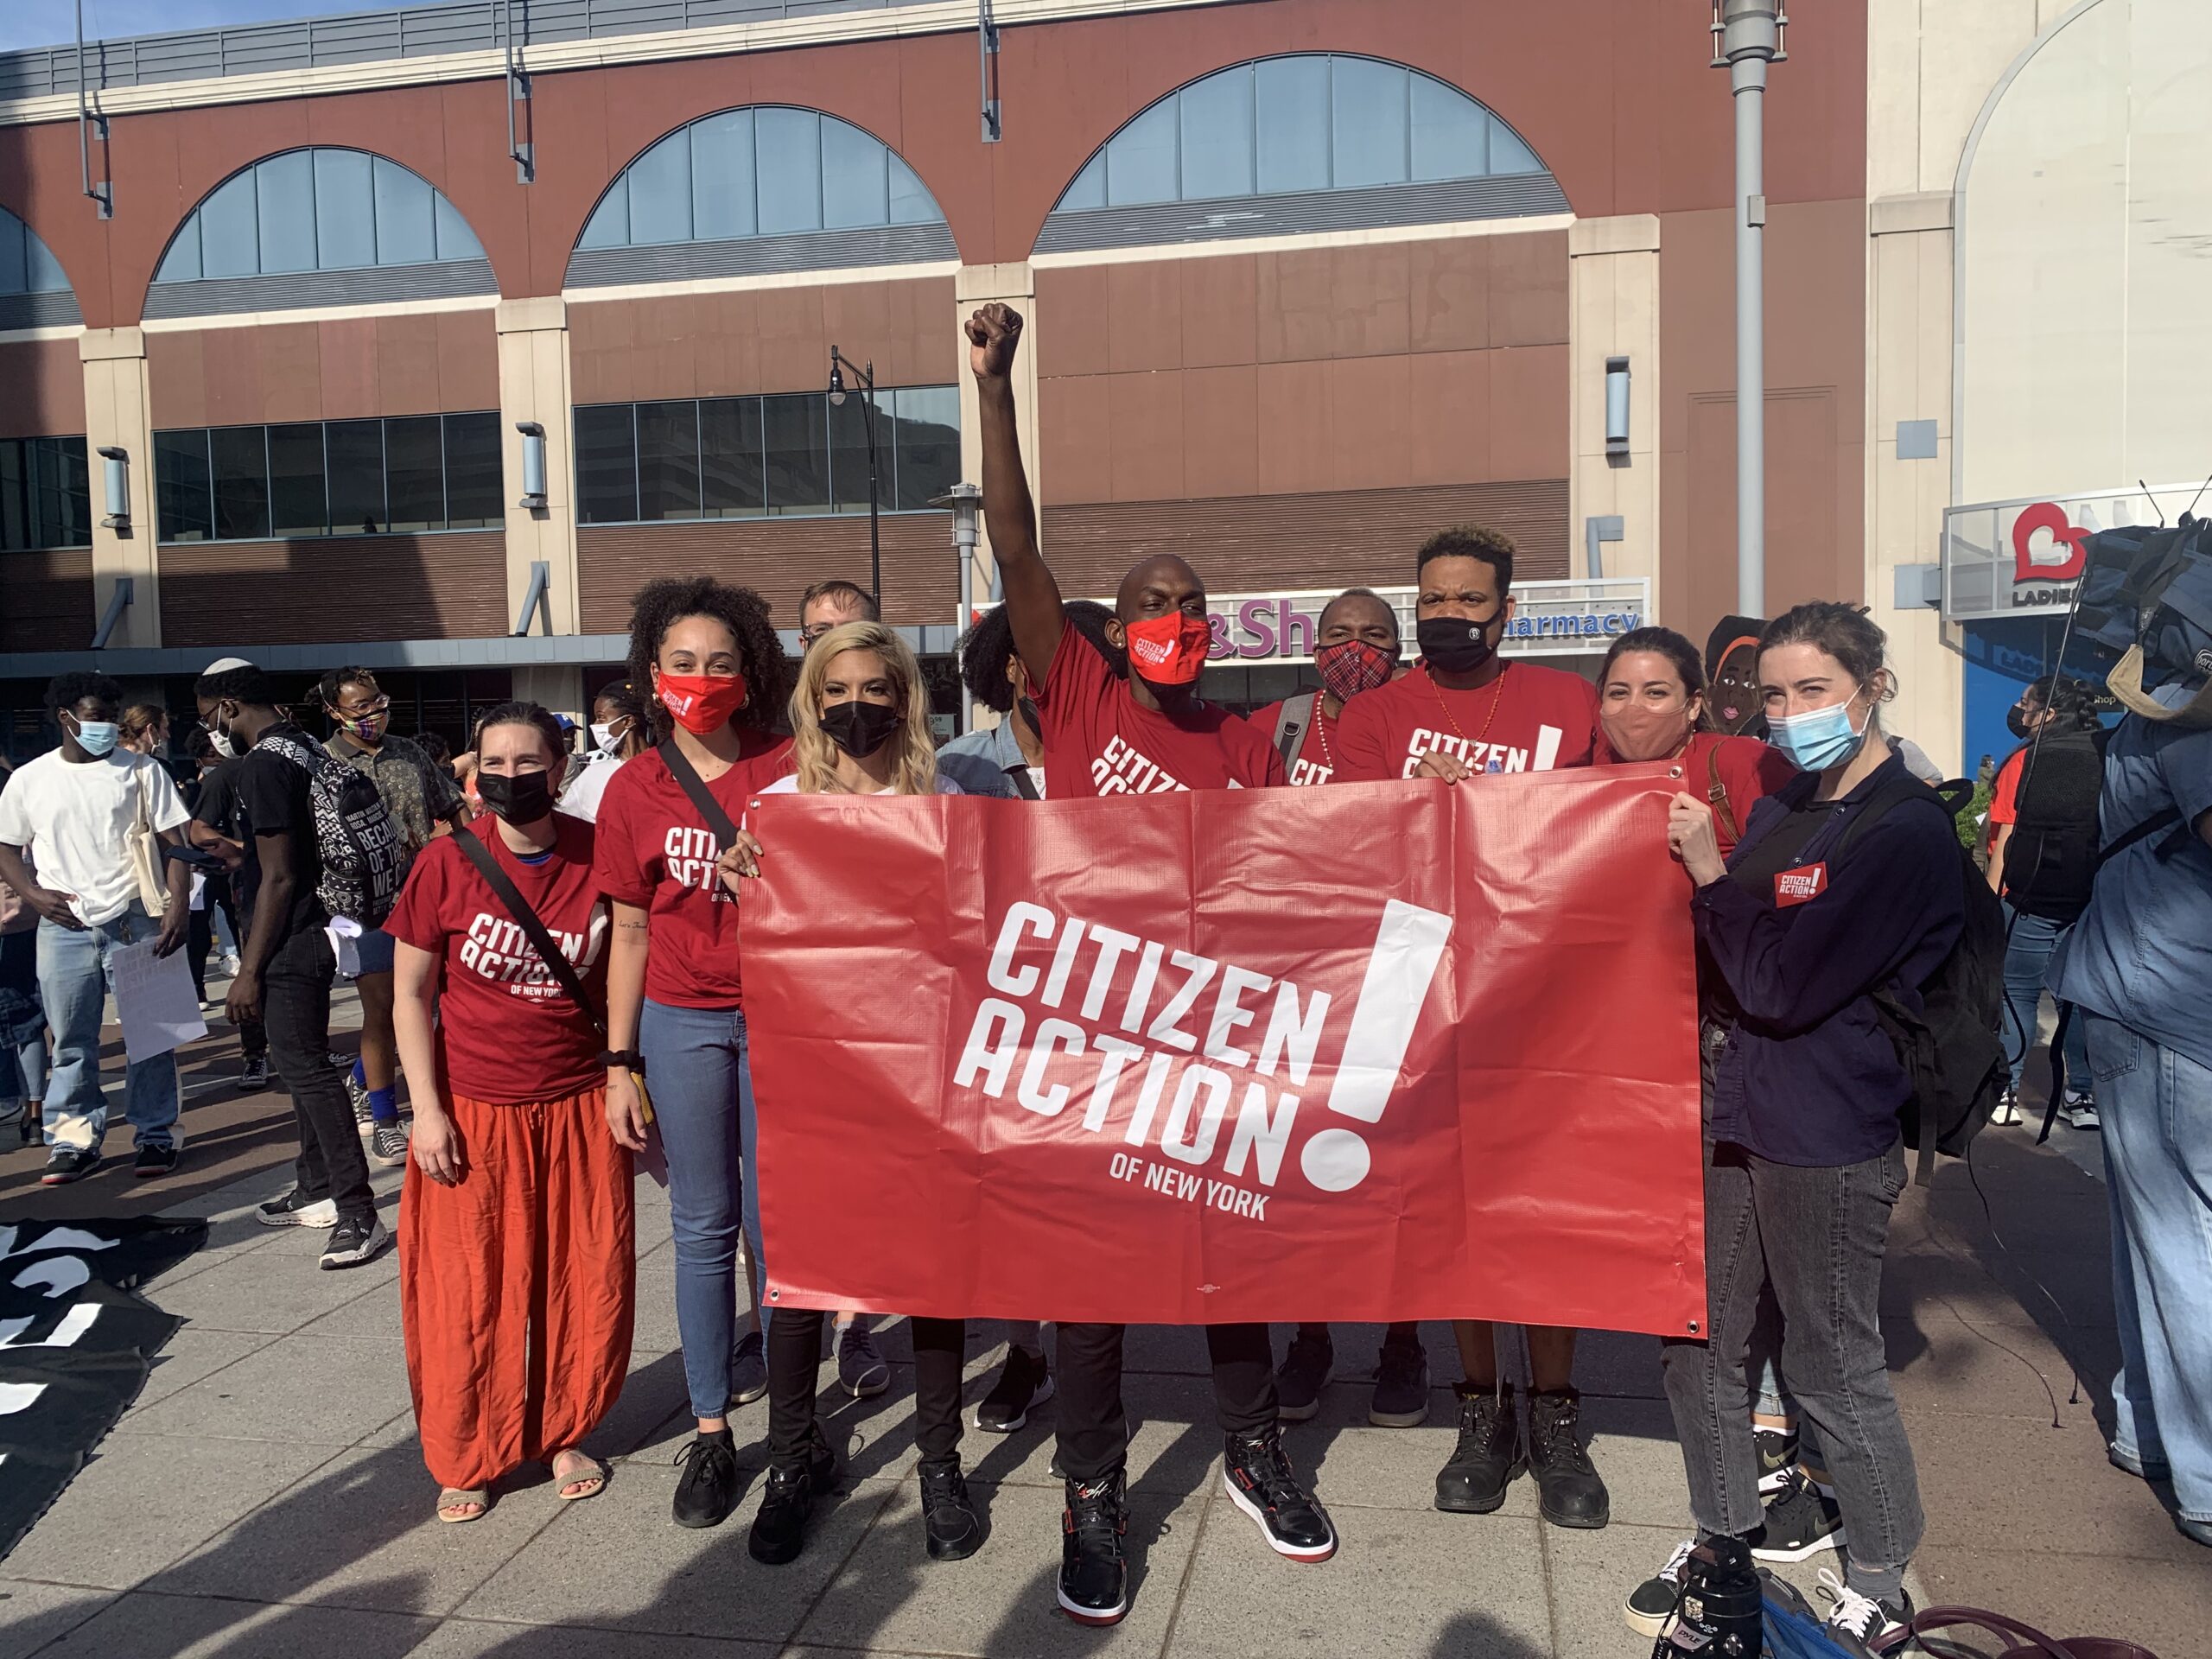 A group of Citizen Action staff and members holding a red banner at a rally.